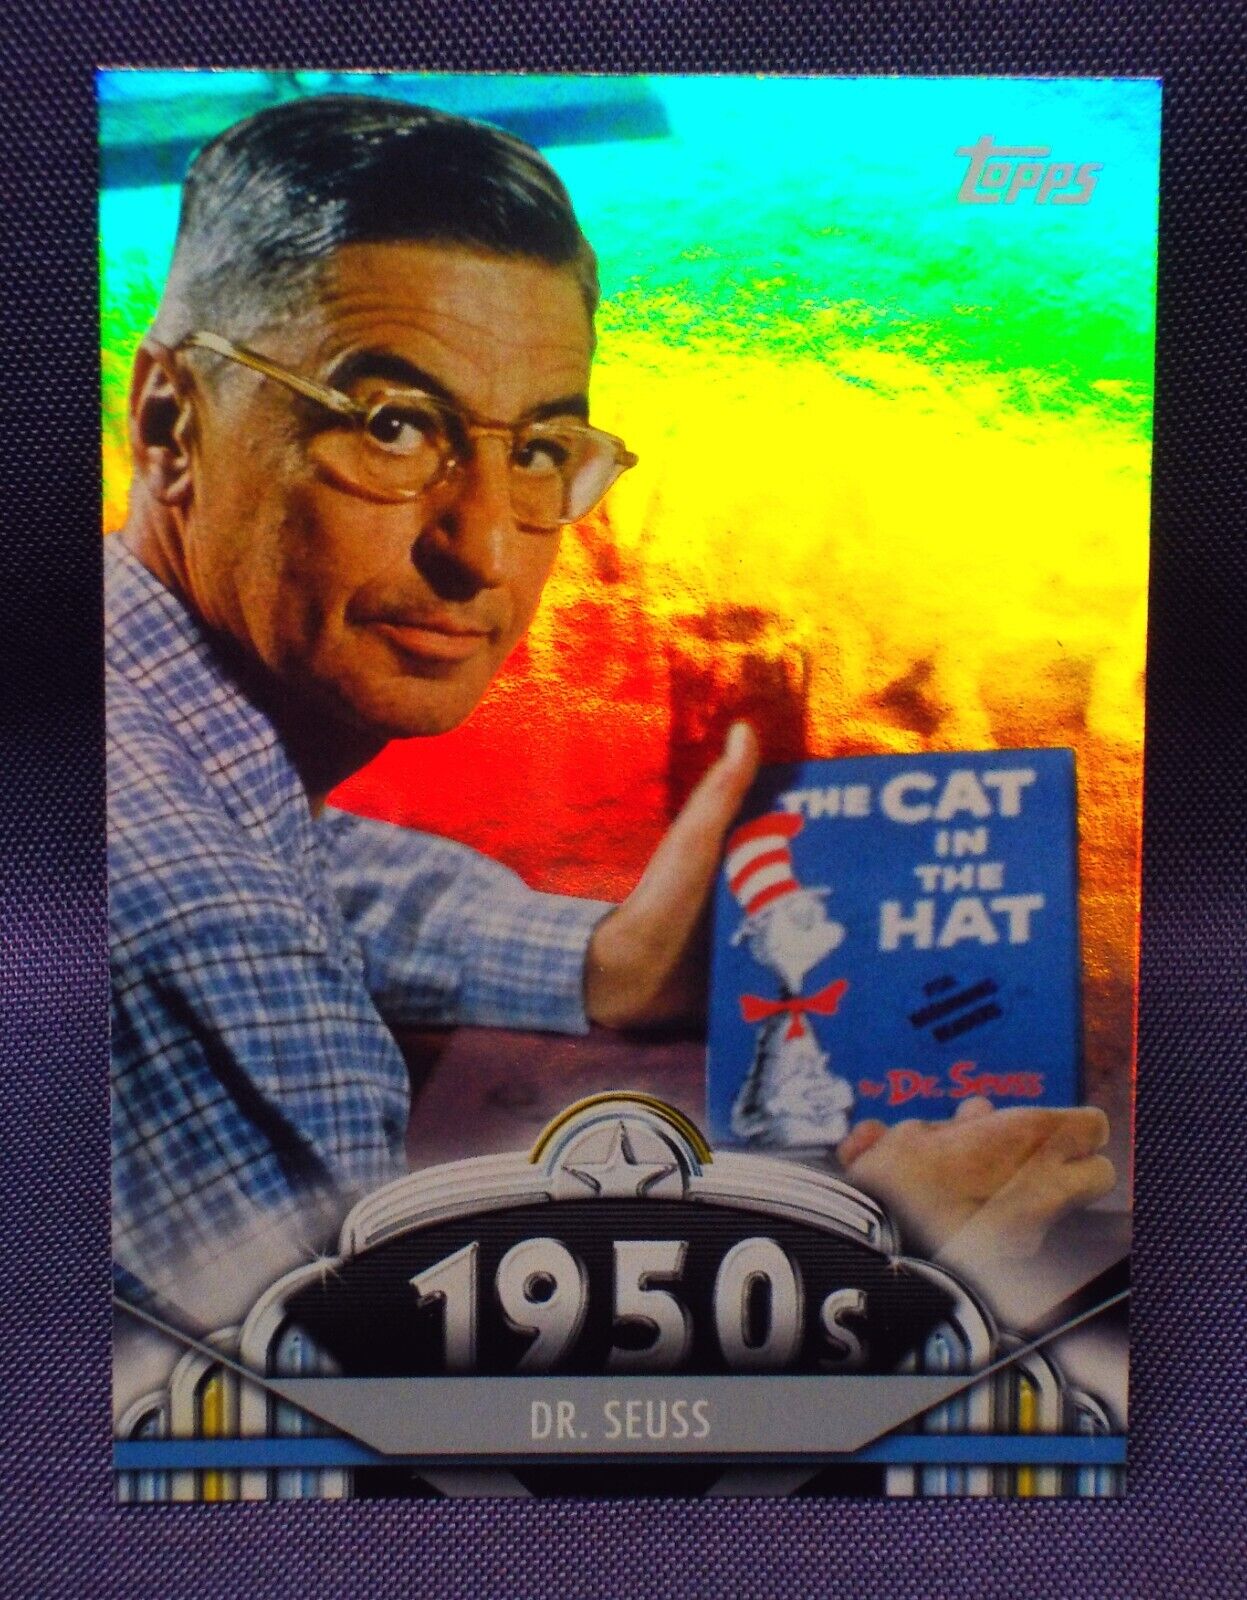 2011 Topps American Pie Limited Edition ✶ HOLO FOIL Refractor card #59 Dr. Seuss